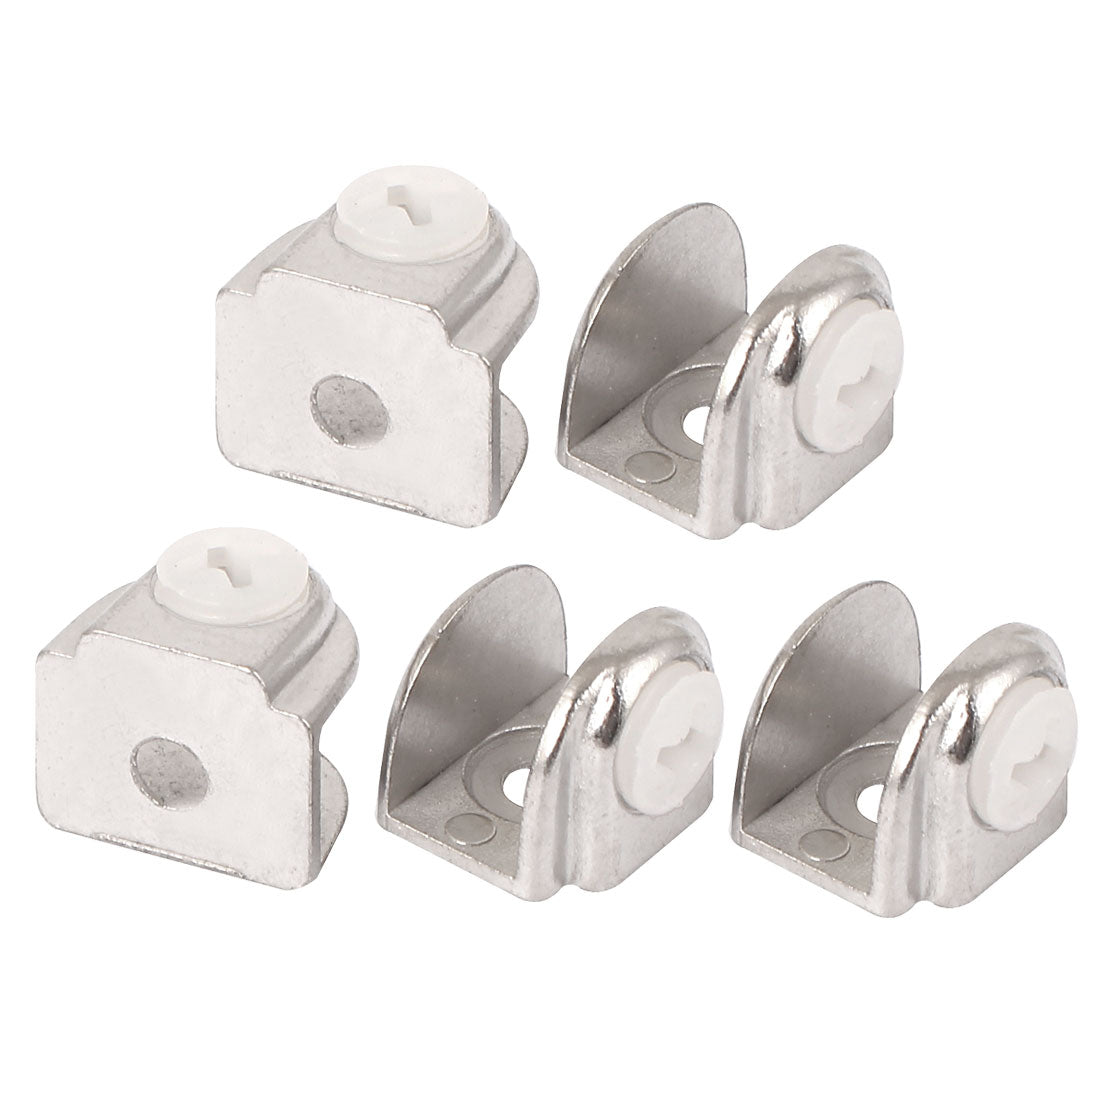 uxcell Uxcell 5pcs Semi-circular Metal Glass Shelf Clamp Bracket Holder Support for 4-8mm Thickness